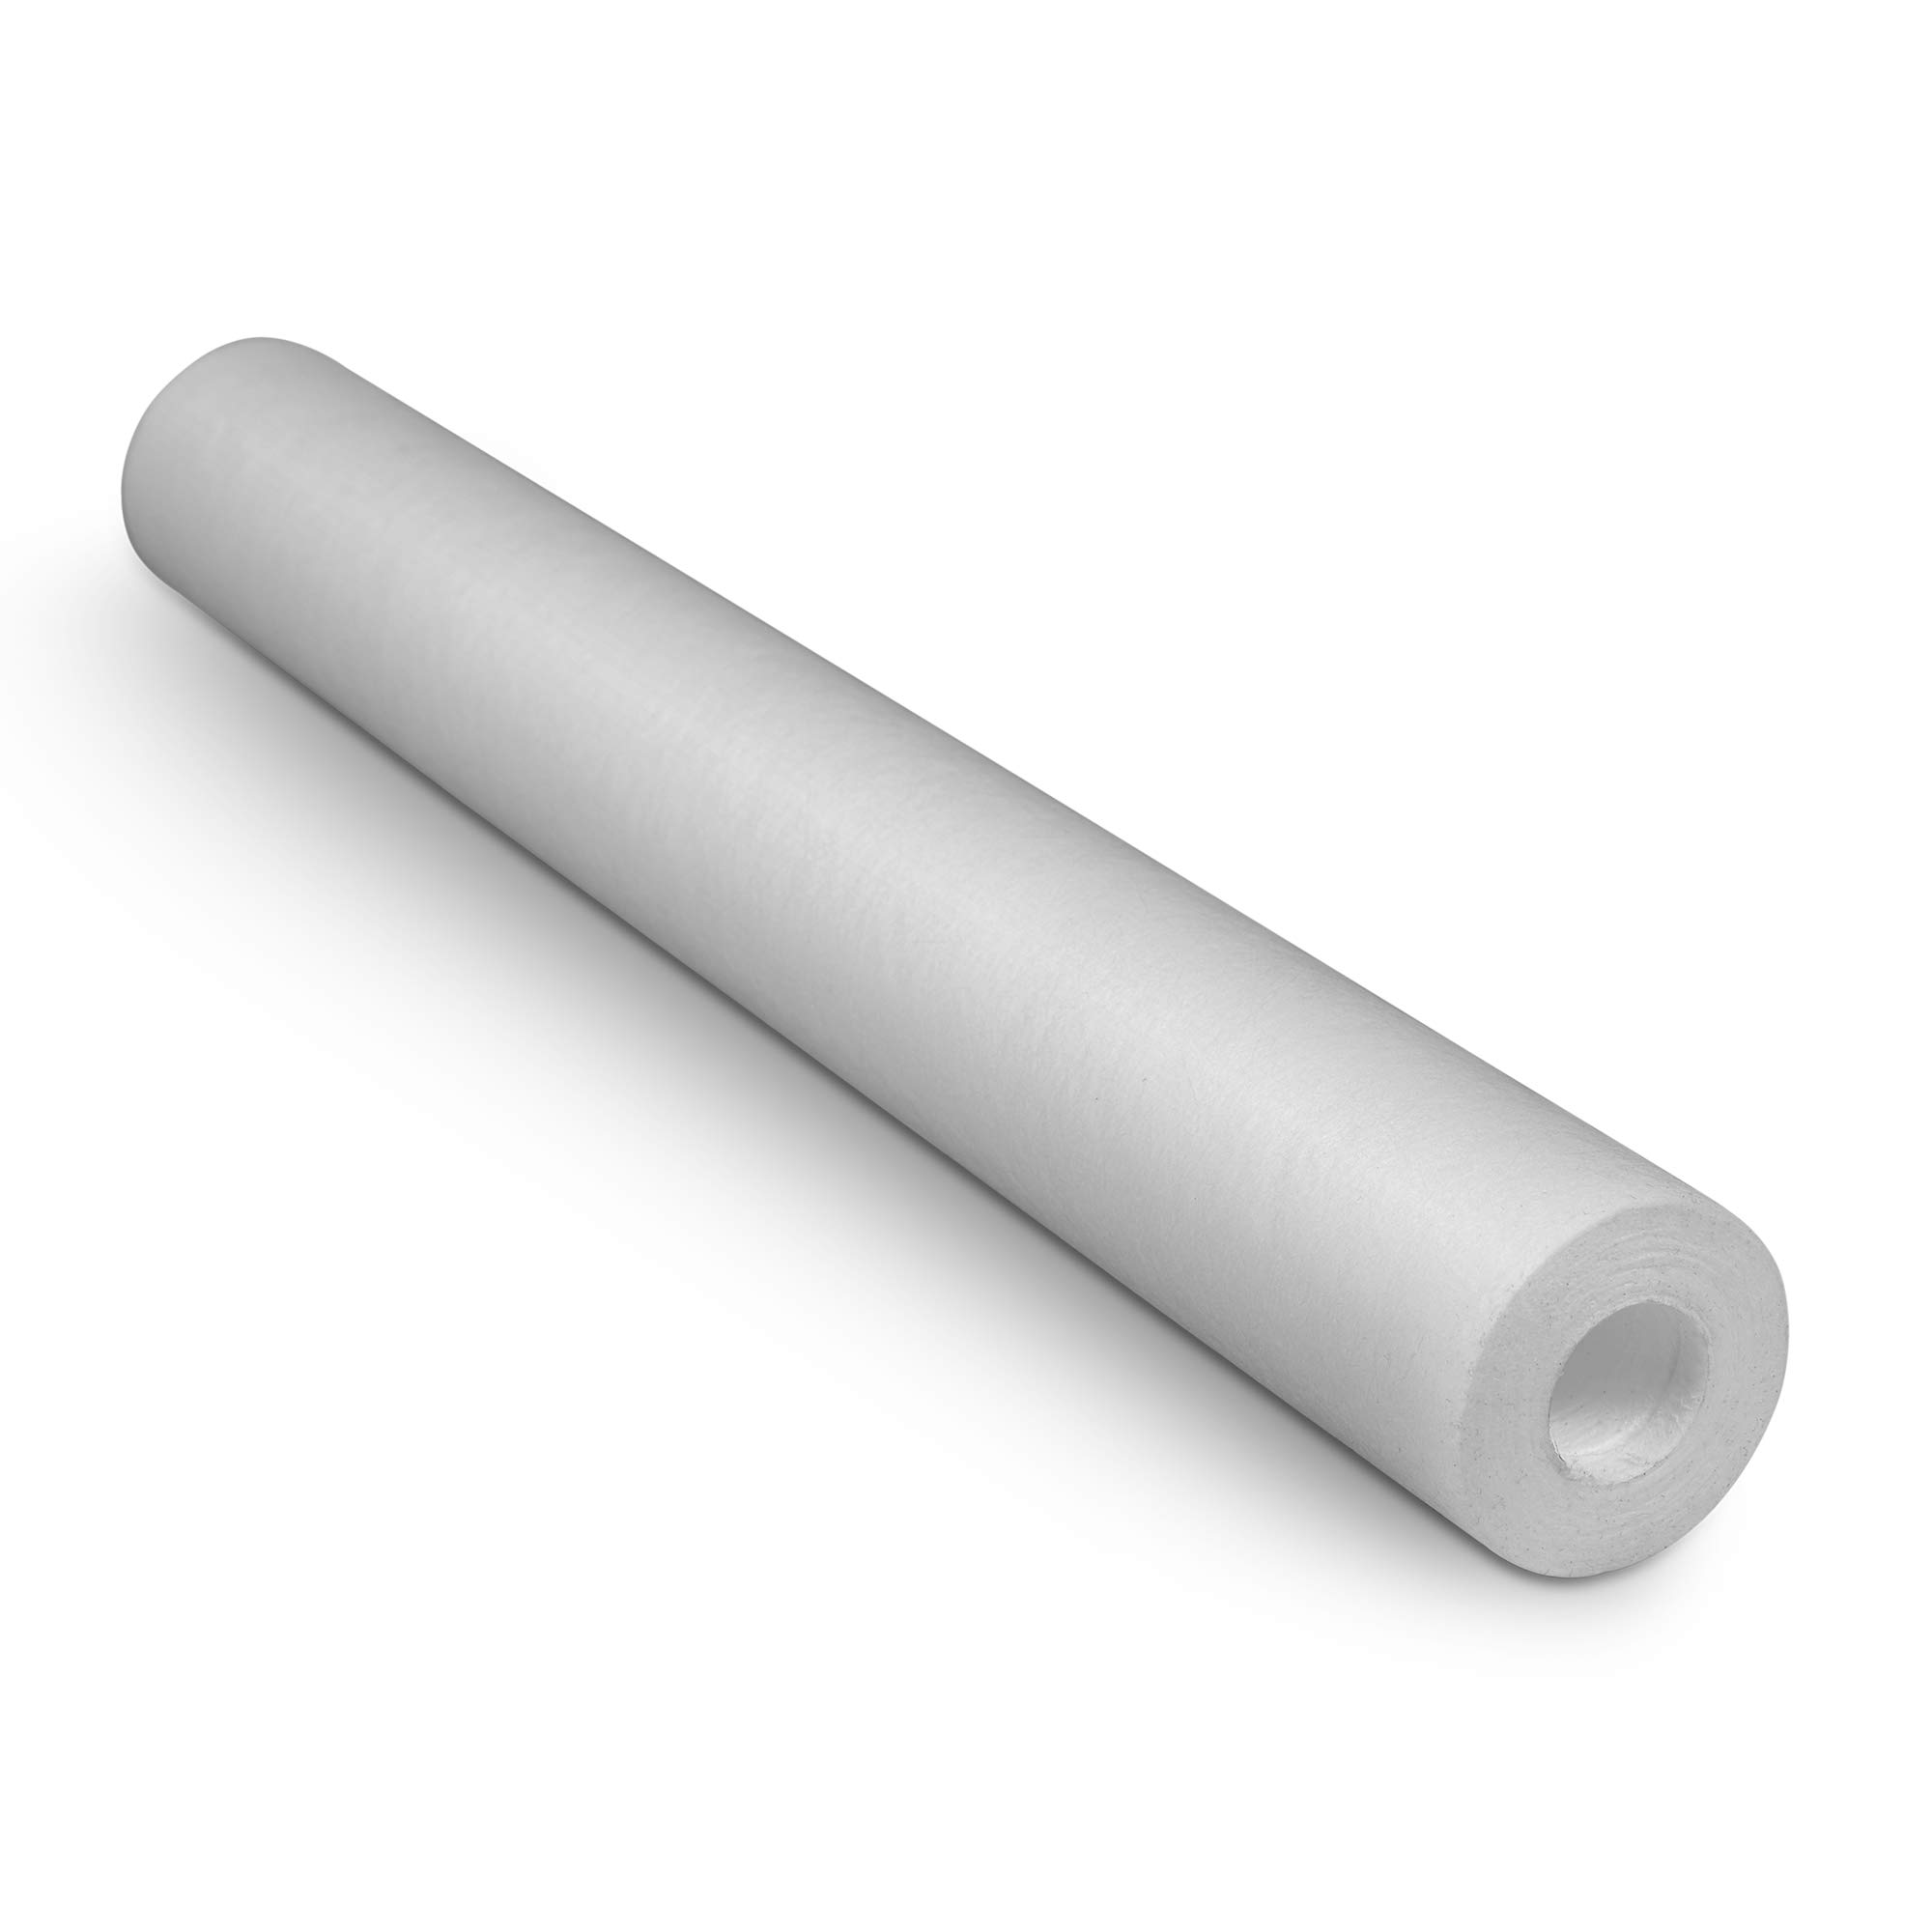 Standard Whole House Melt-blown Four Layers Filtration Polypropylene 10 Micron Sediment Filter 20” x 2.5” Fits 20” x 2.5” Housings. Compatible with FPMB5-20, FPMB520, SDC-25-2005/4, VX05-20 Pack of 4